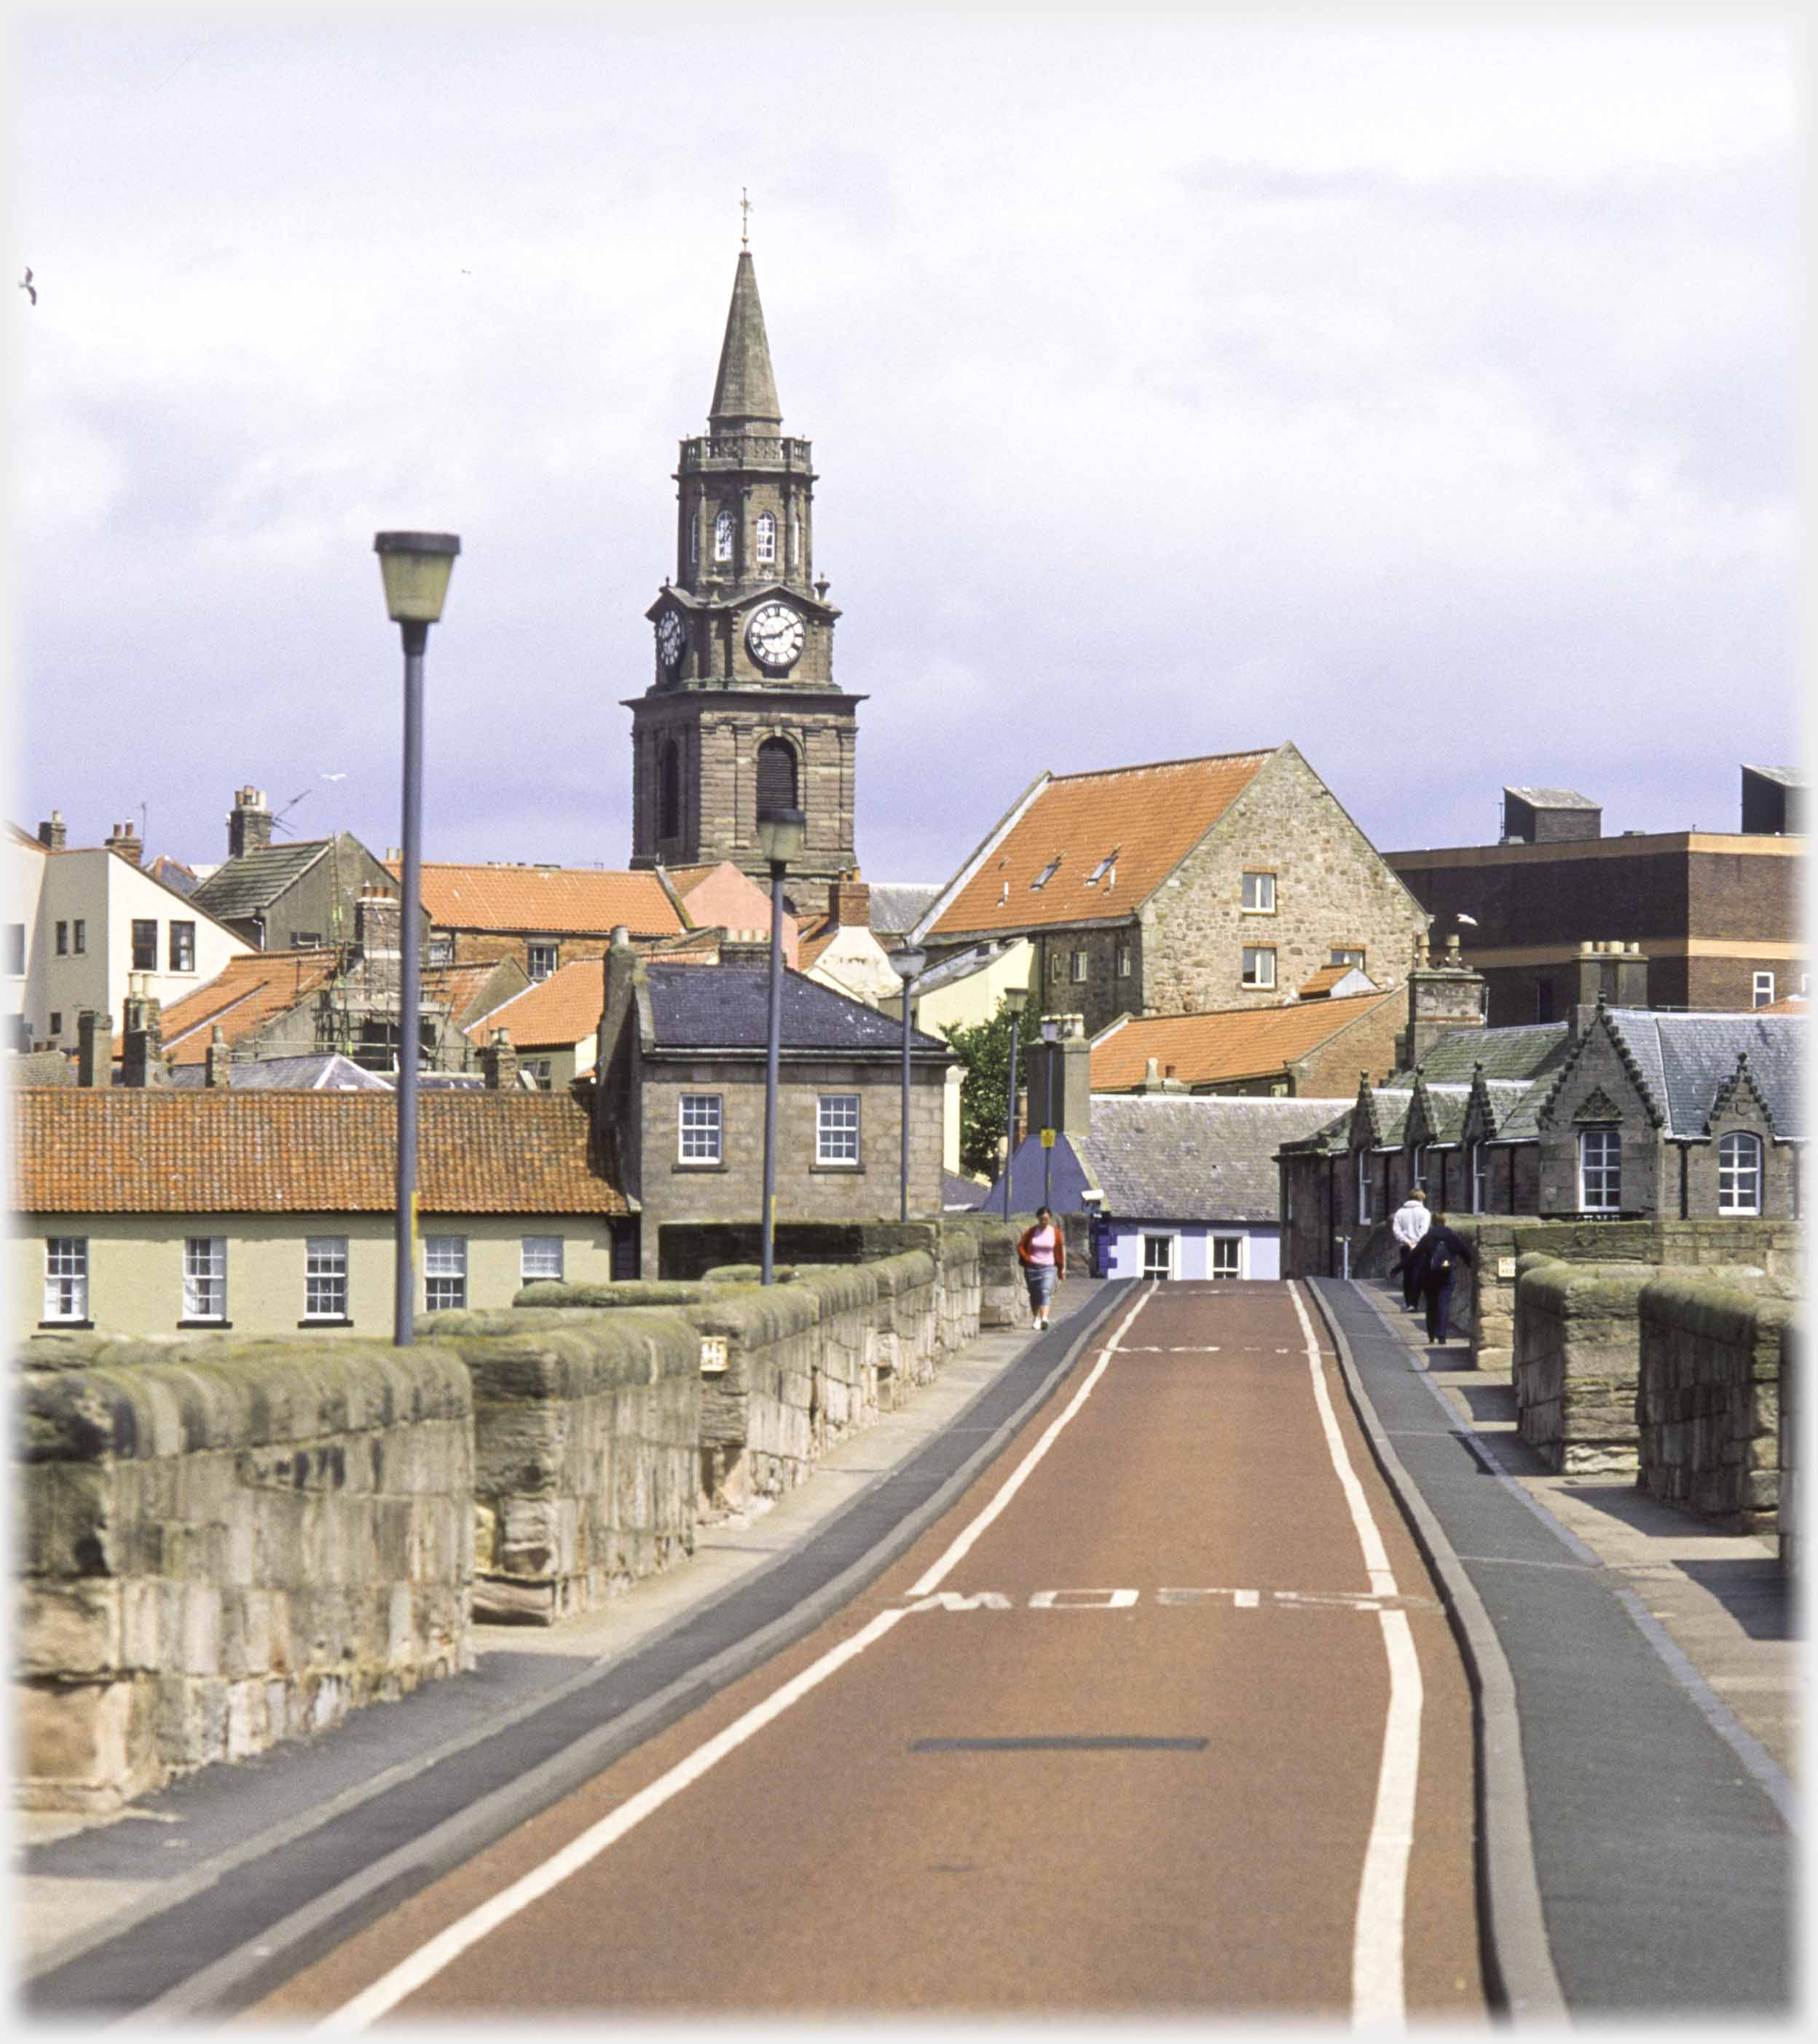 View along narrow parapeted bridge with buildings ahead.